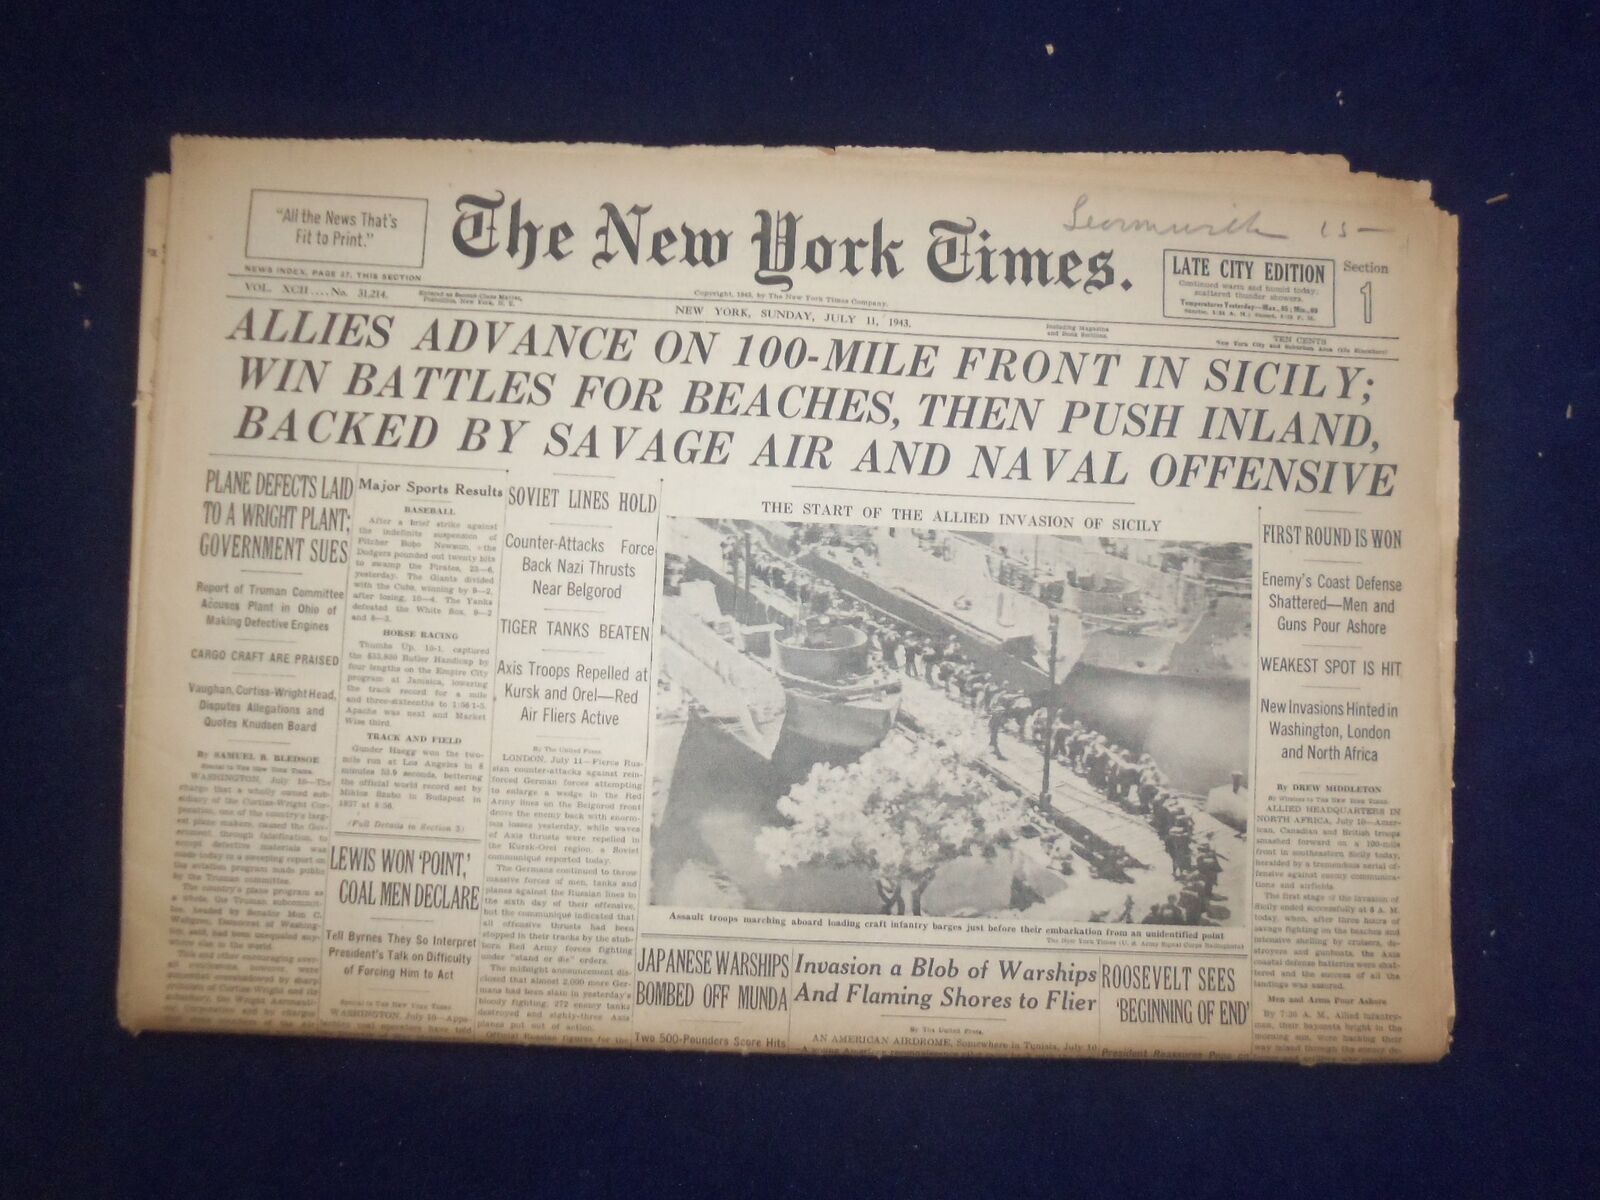 1943 JULY 11 NEW YORK TIMES -ALLIES ADVANCE ON 100-MILE FRONT IN SICILY- NP 6543